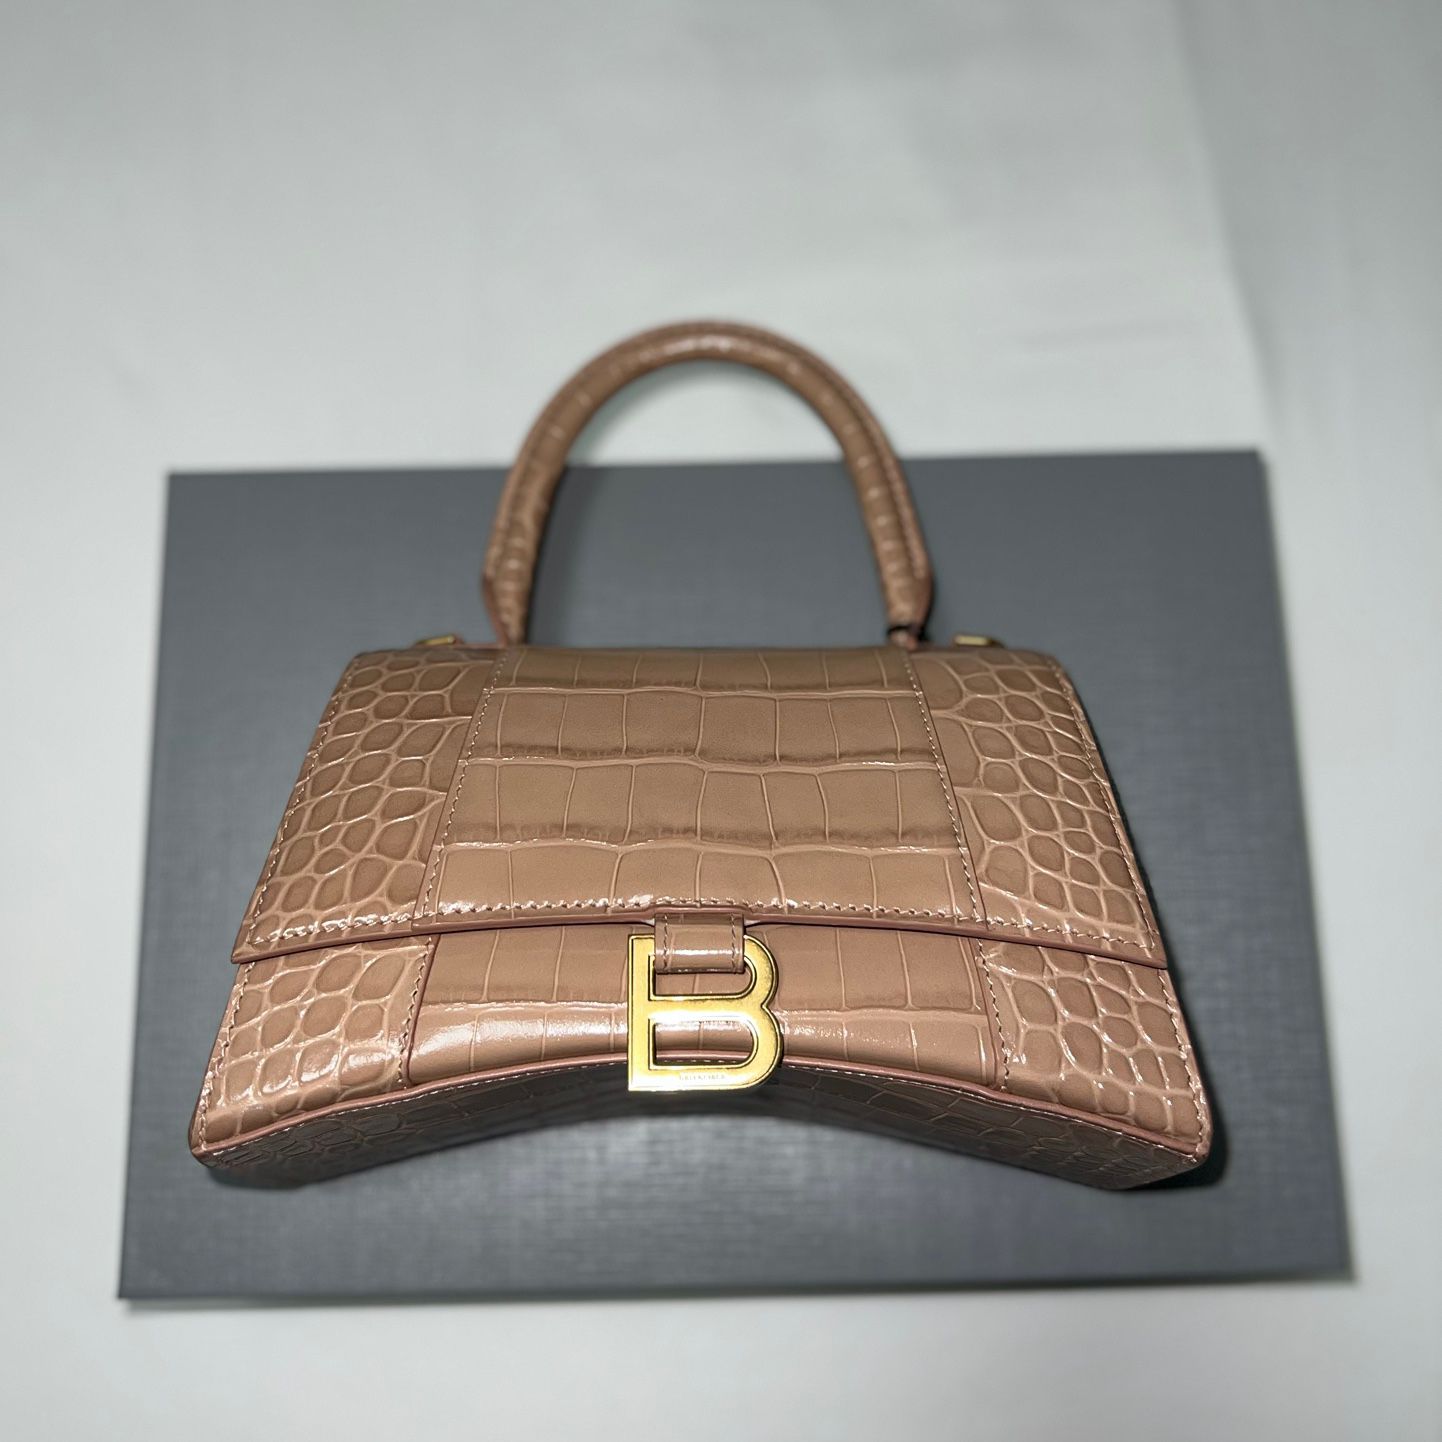 Balenciaga Hourglass Xs Hand Bags for Sale in Bronx, NY - OfferUp